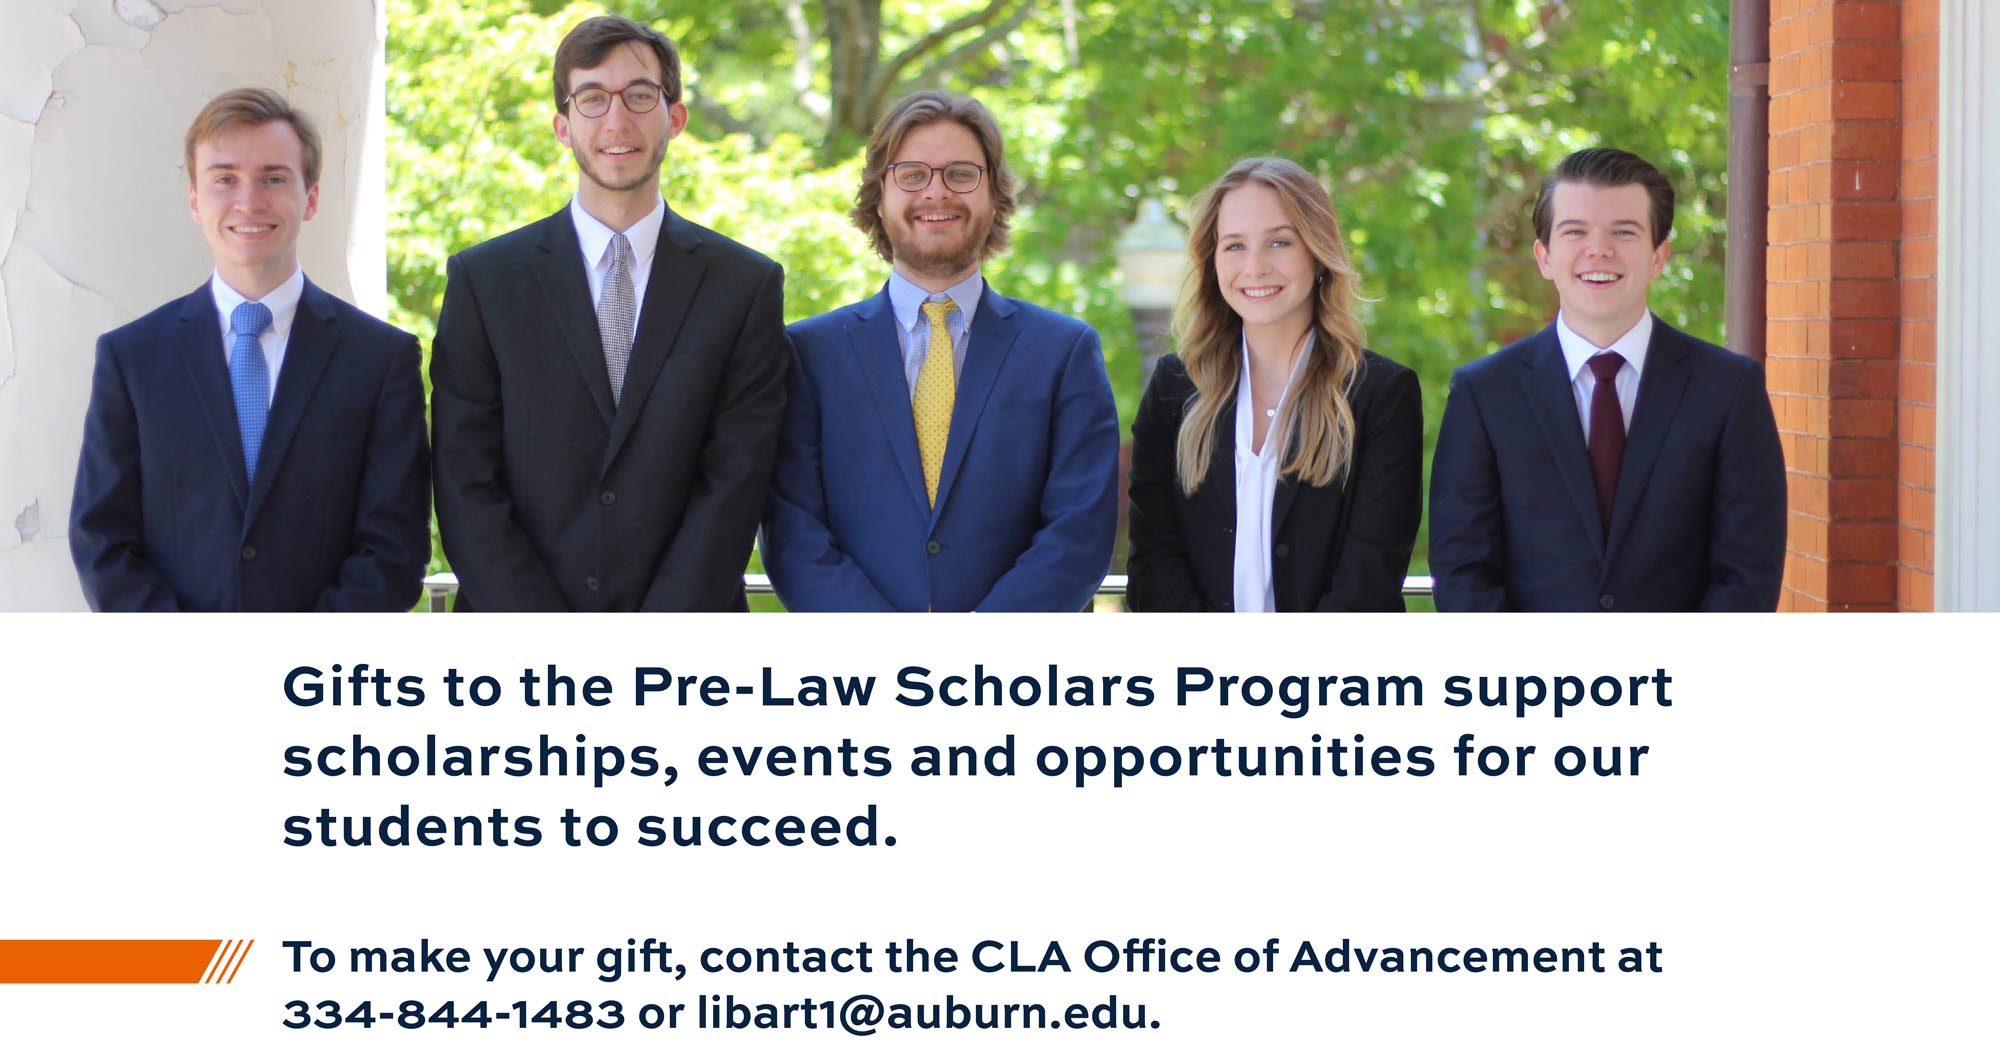 Gifts to the Pre-Law Scholars Program support scholarships, events and opportunities for our students to succeed. To make your gift, contact the CLA Office of Advancement at 334-844-1483 or libart1@auburn.edu.